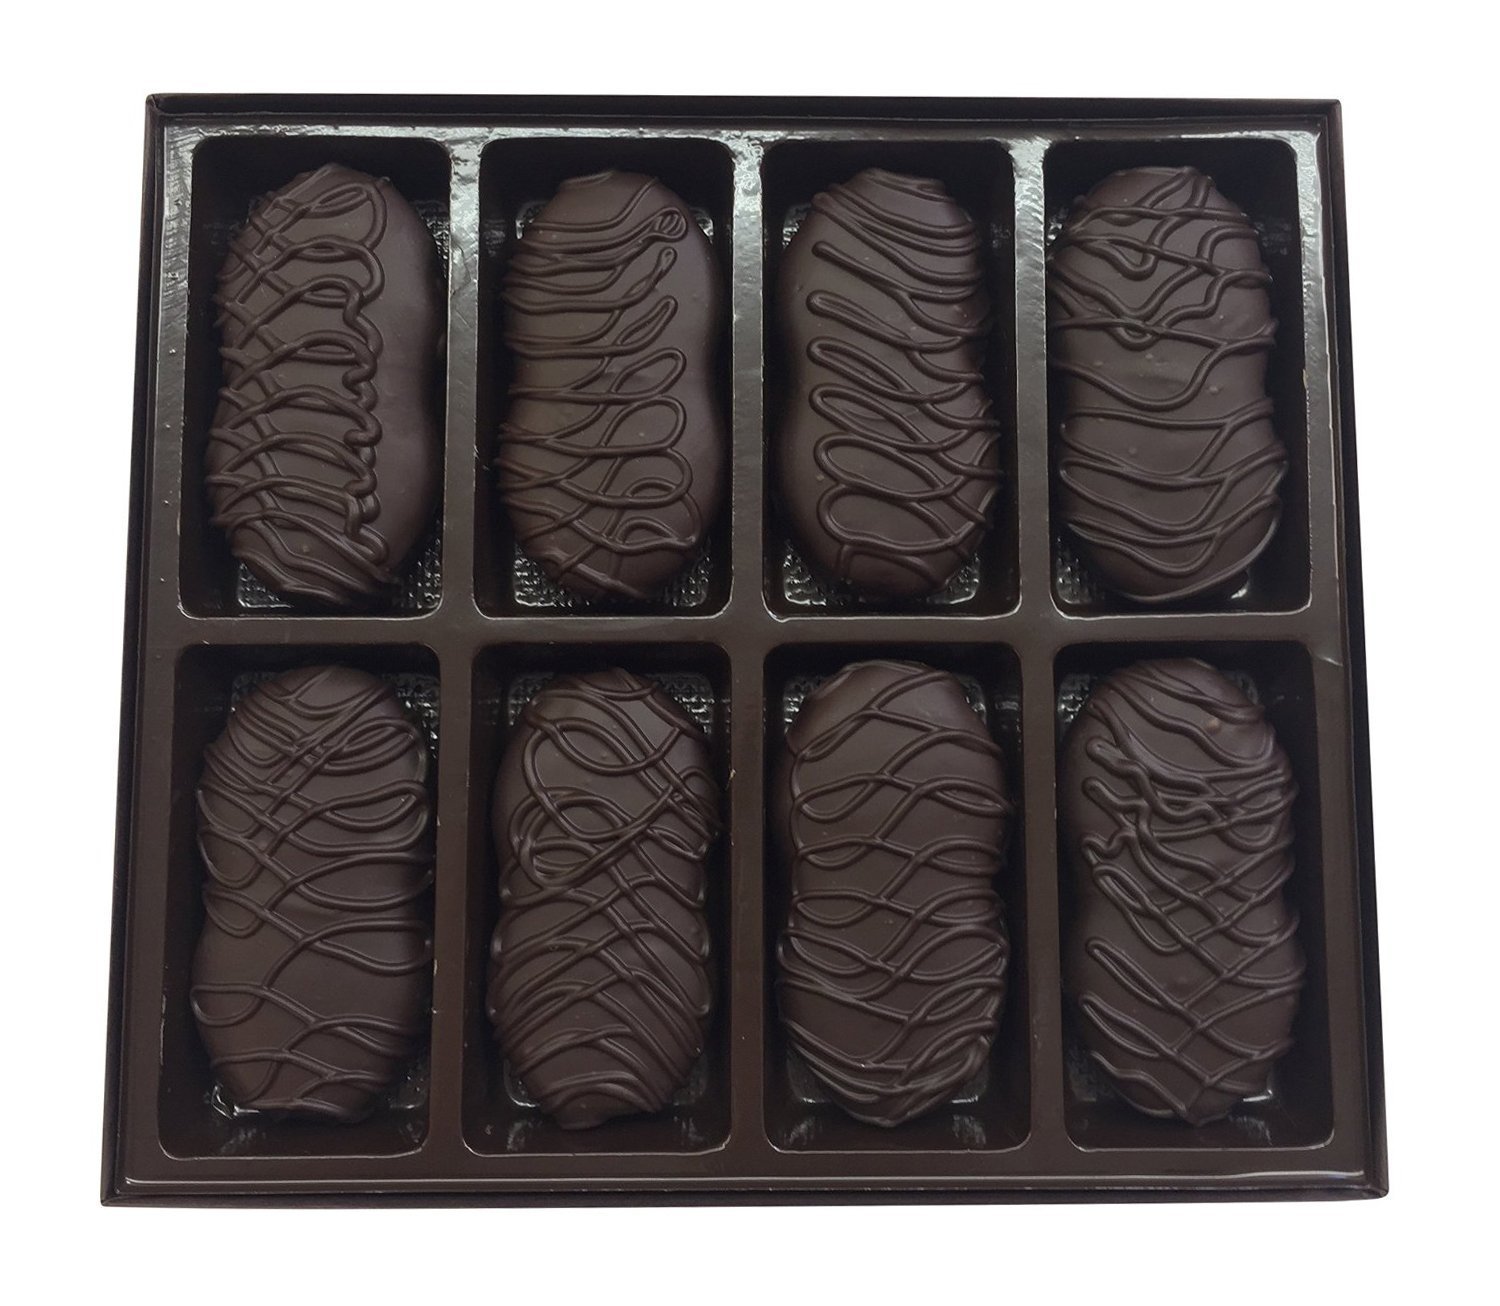 Philadelphia Candies Dark Chocolate Covered Nutter Butter Cookies, 8-ounce Gift